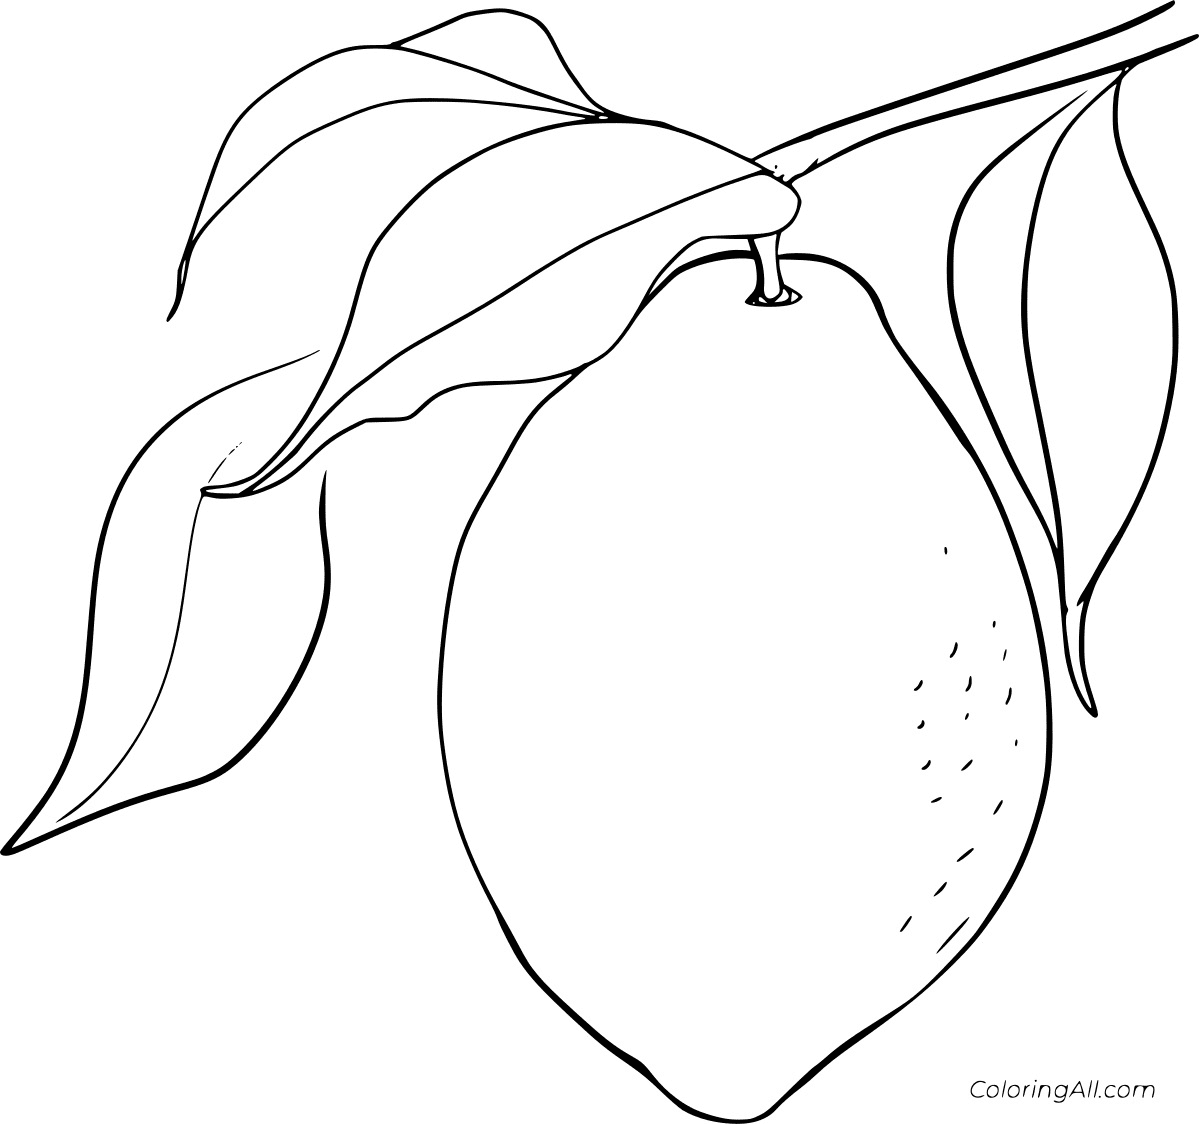 Lemon On The Tree Coloring Page